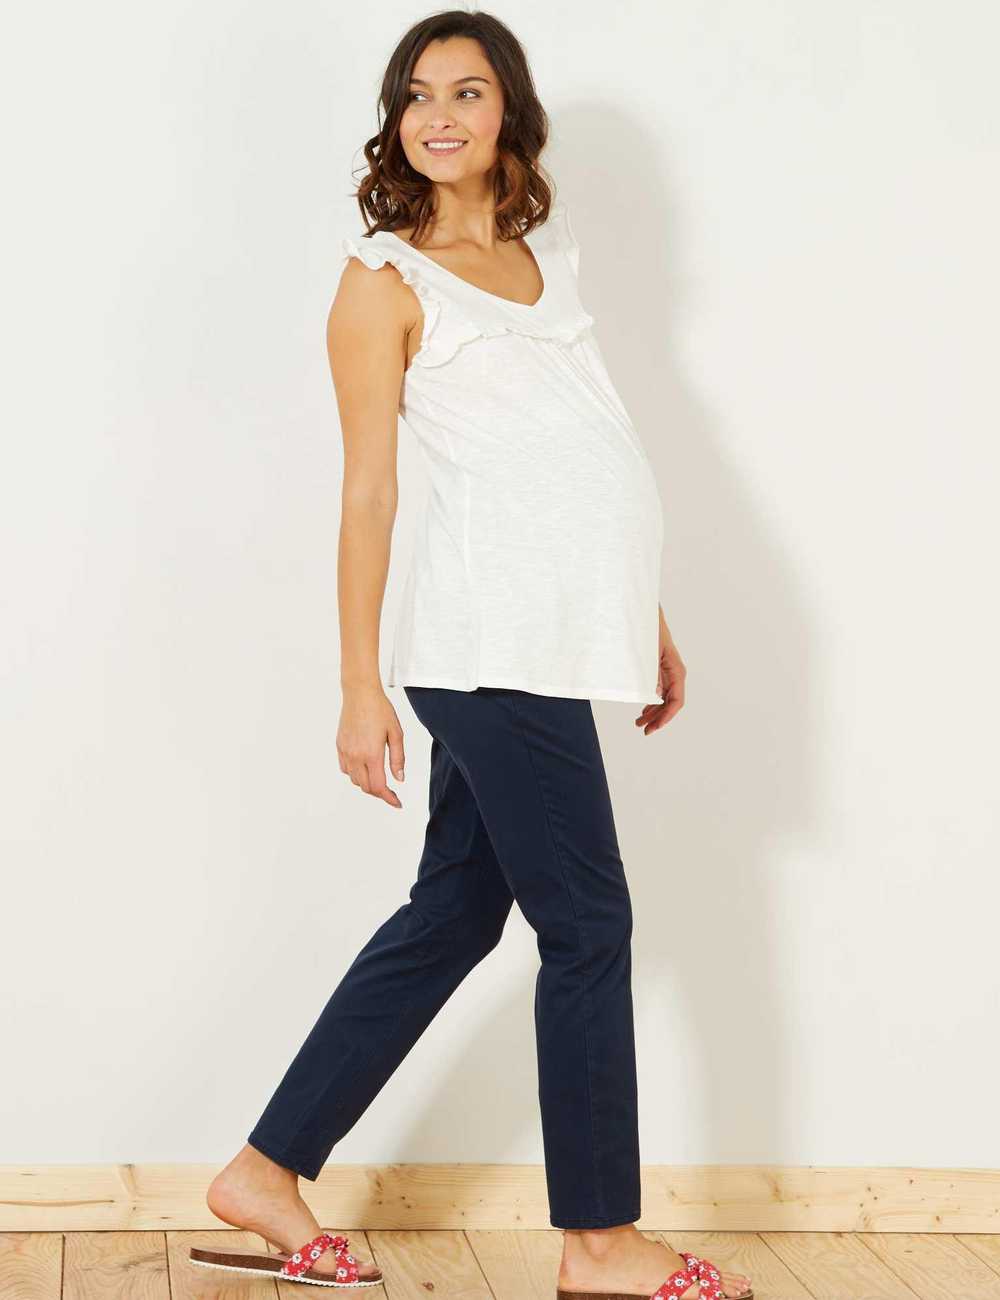 Buy Twill maternity trousers Online in Dubai & the UAE